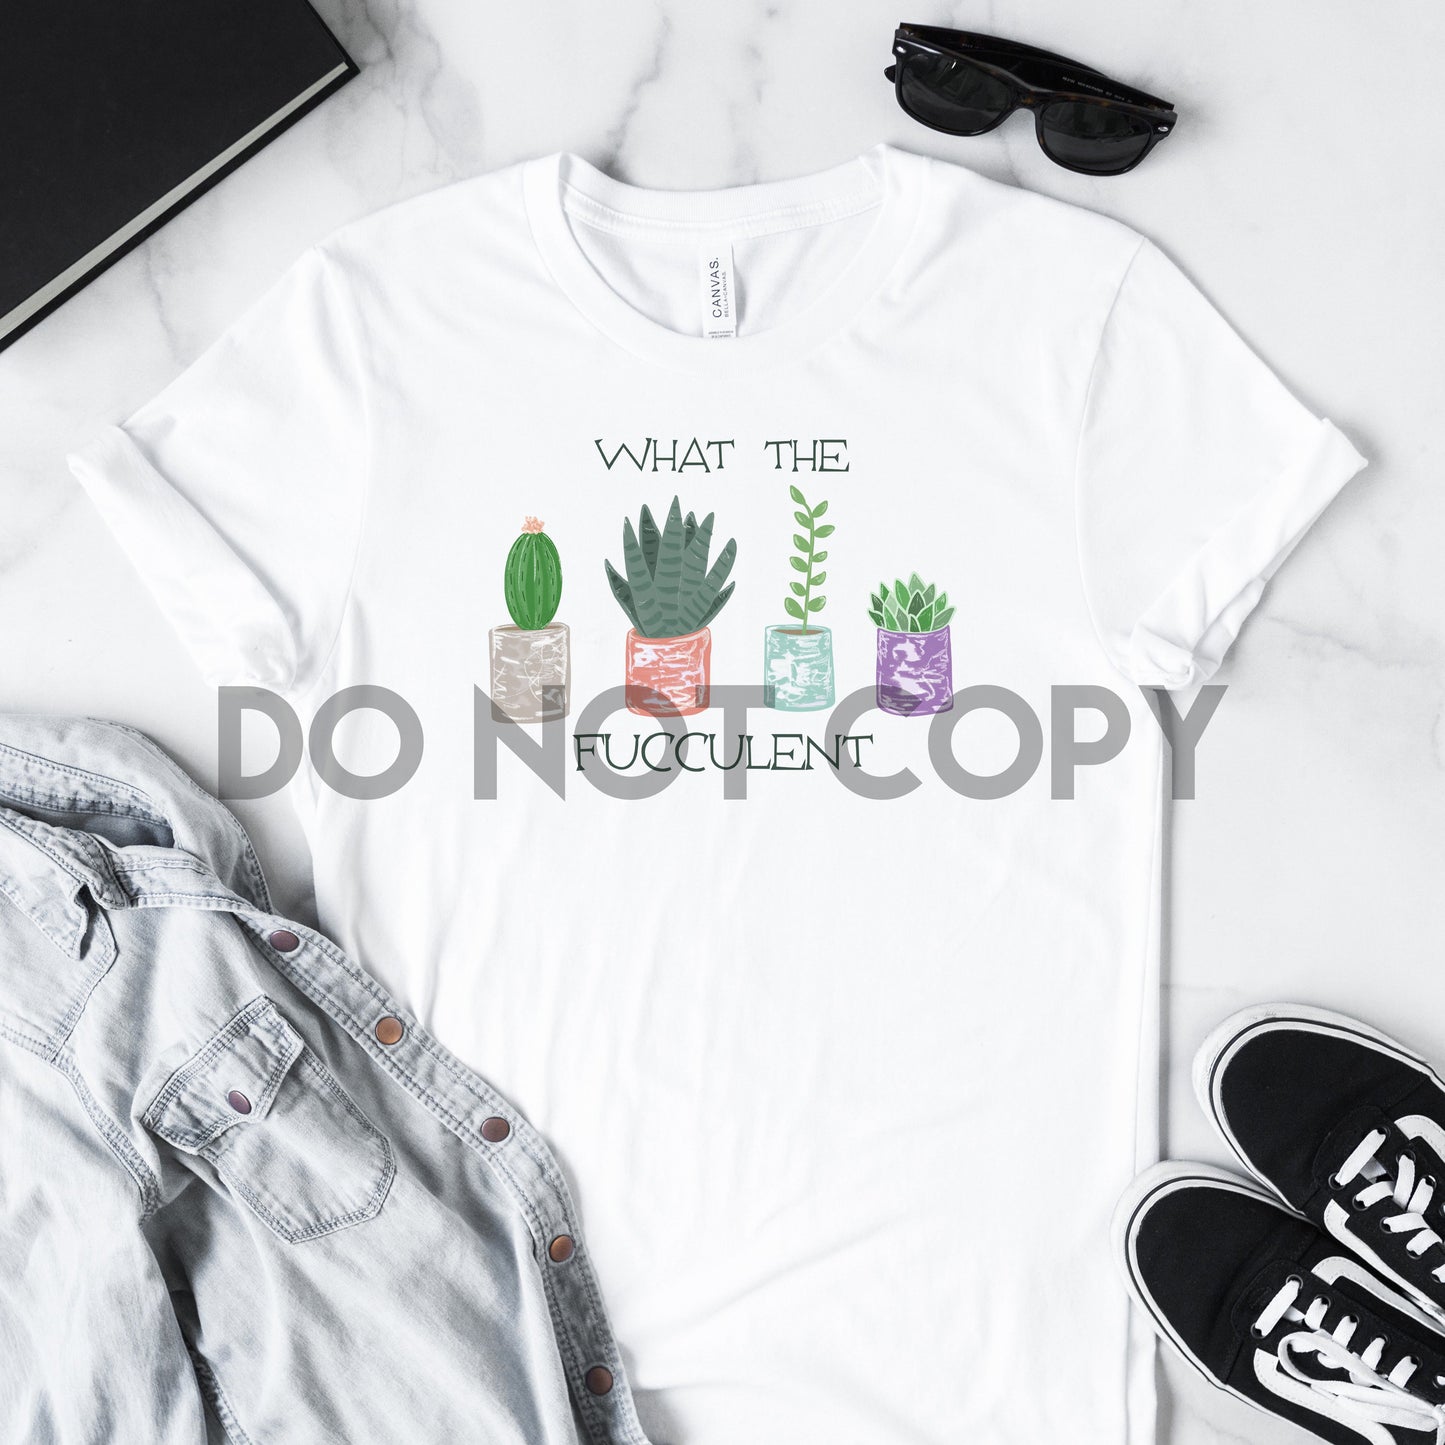 What The Fucculent Potted Succulents Dream Print or Sublimation Print